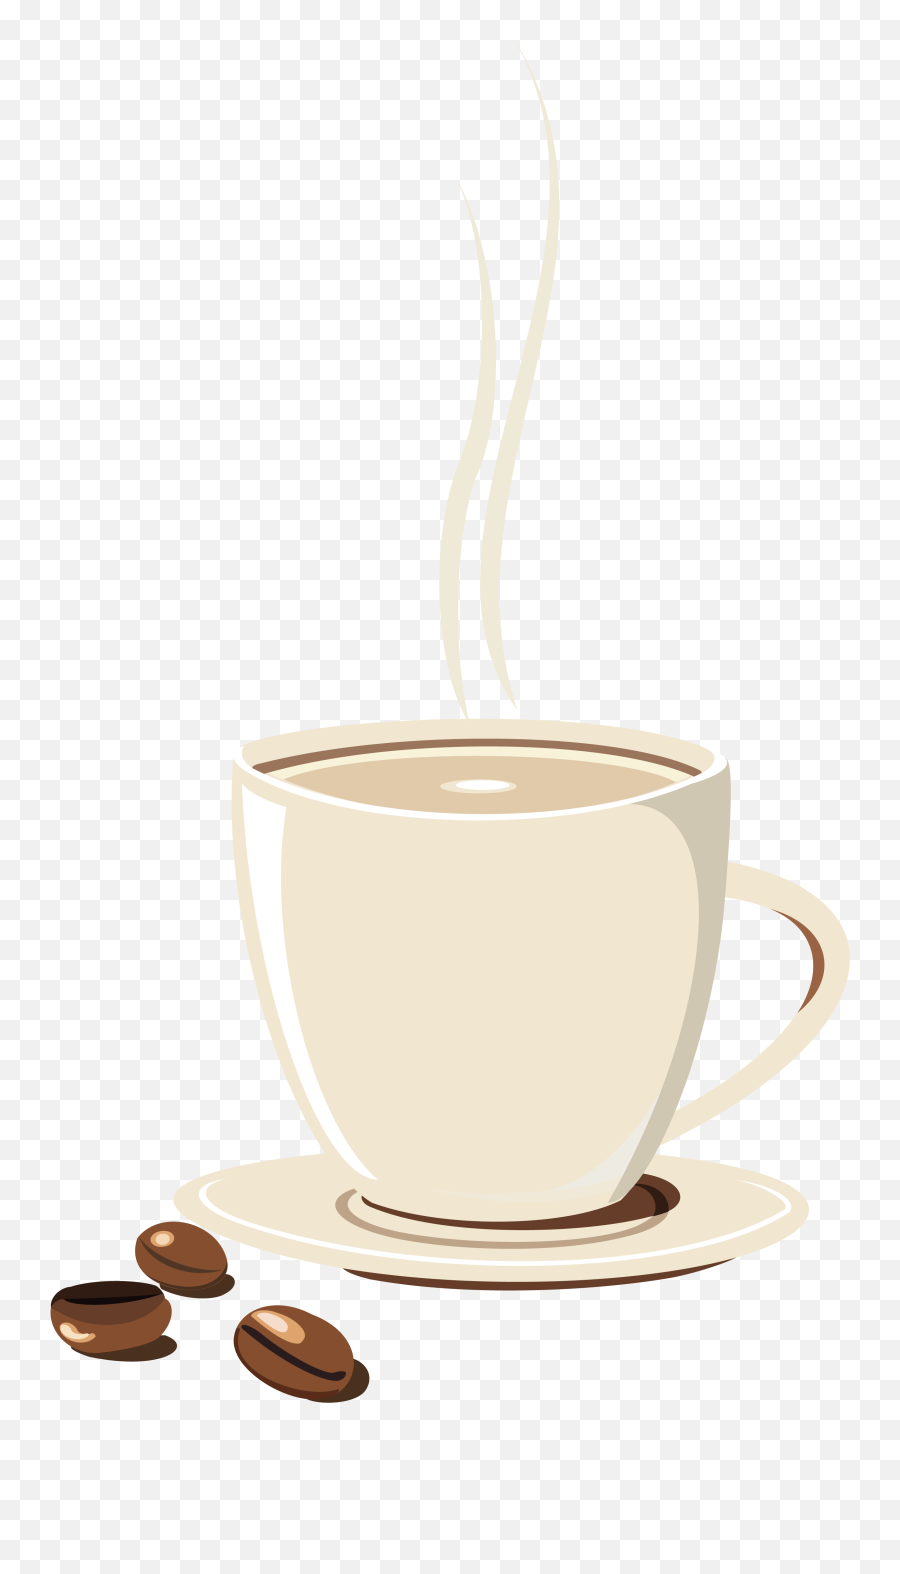 Vintage Coffee Cup Png Transparent Png - Transparent Silhouette Download Png Coffee Emoji,Coffee Cup Clipart